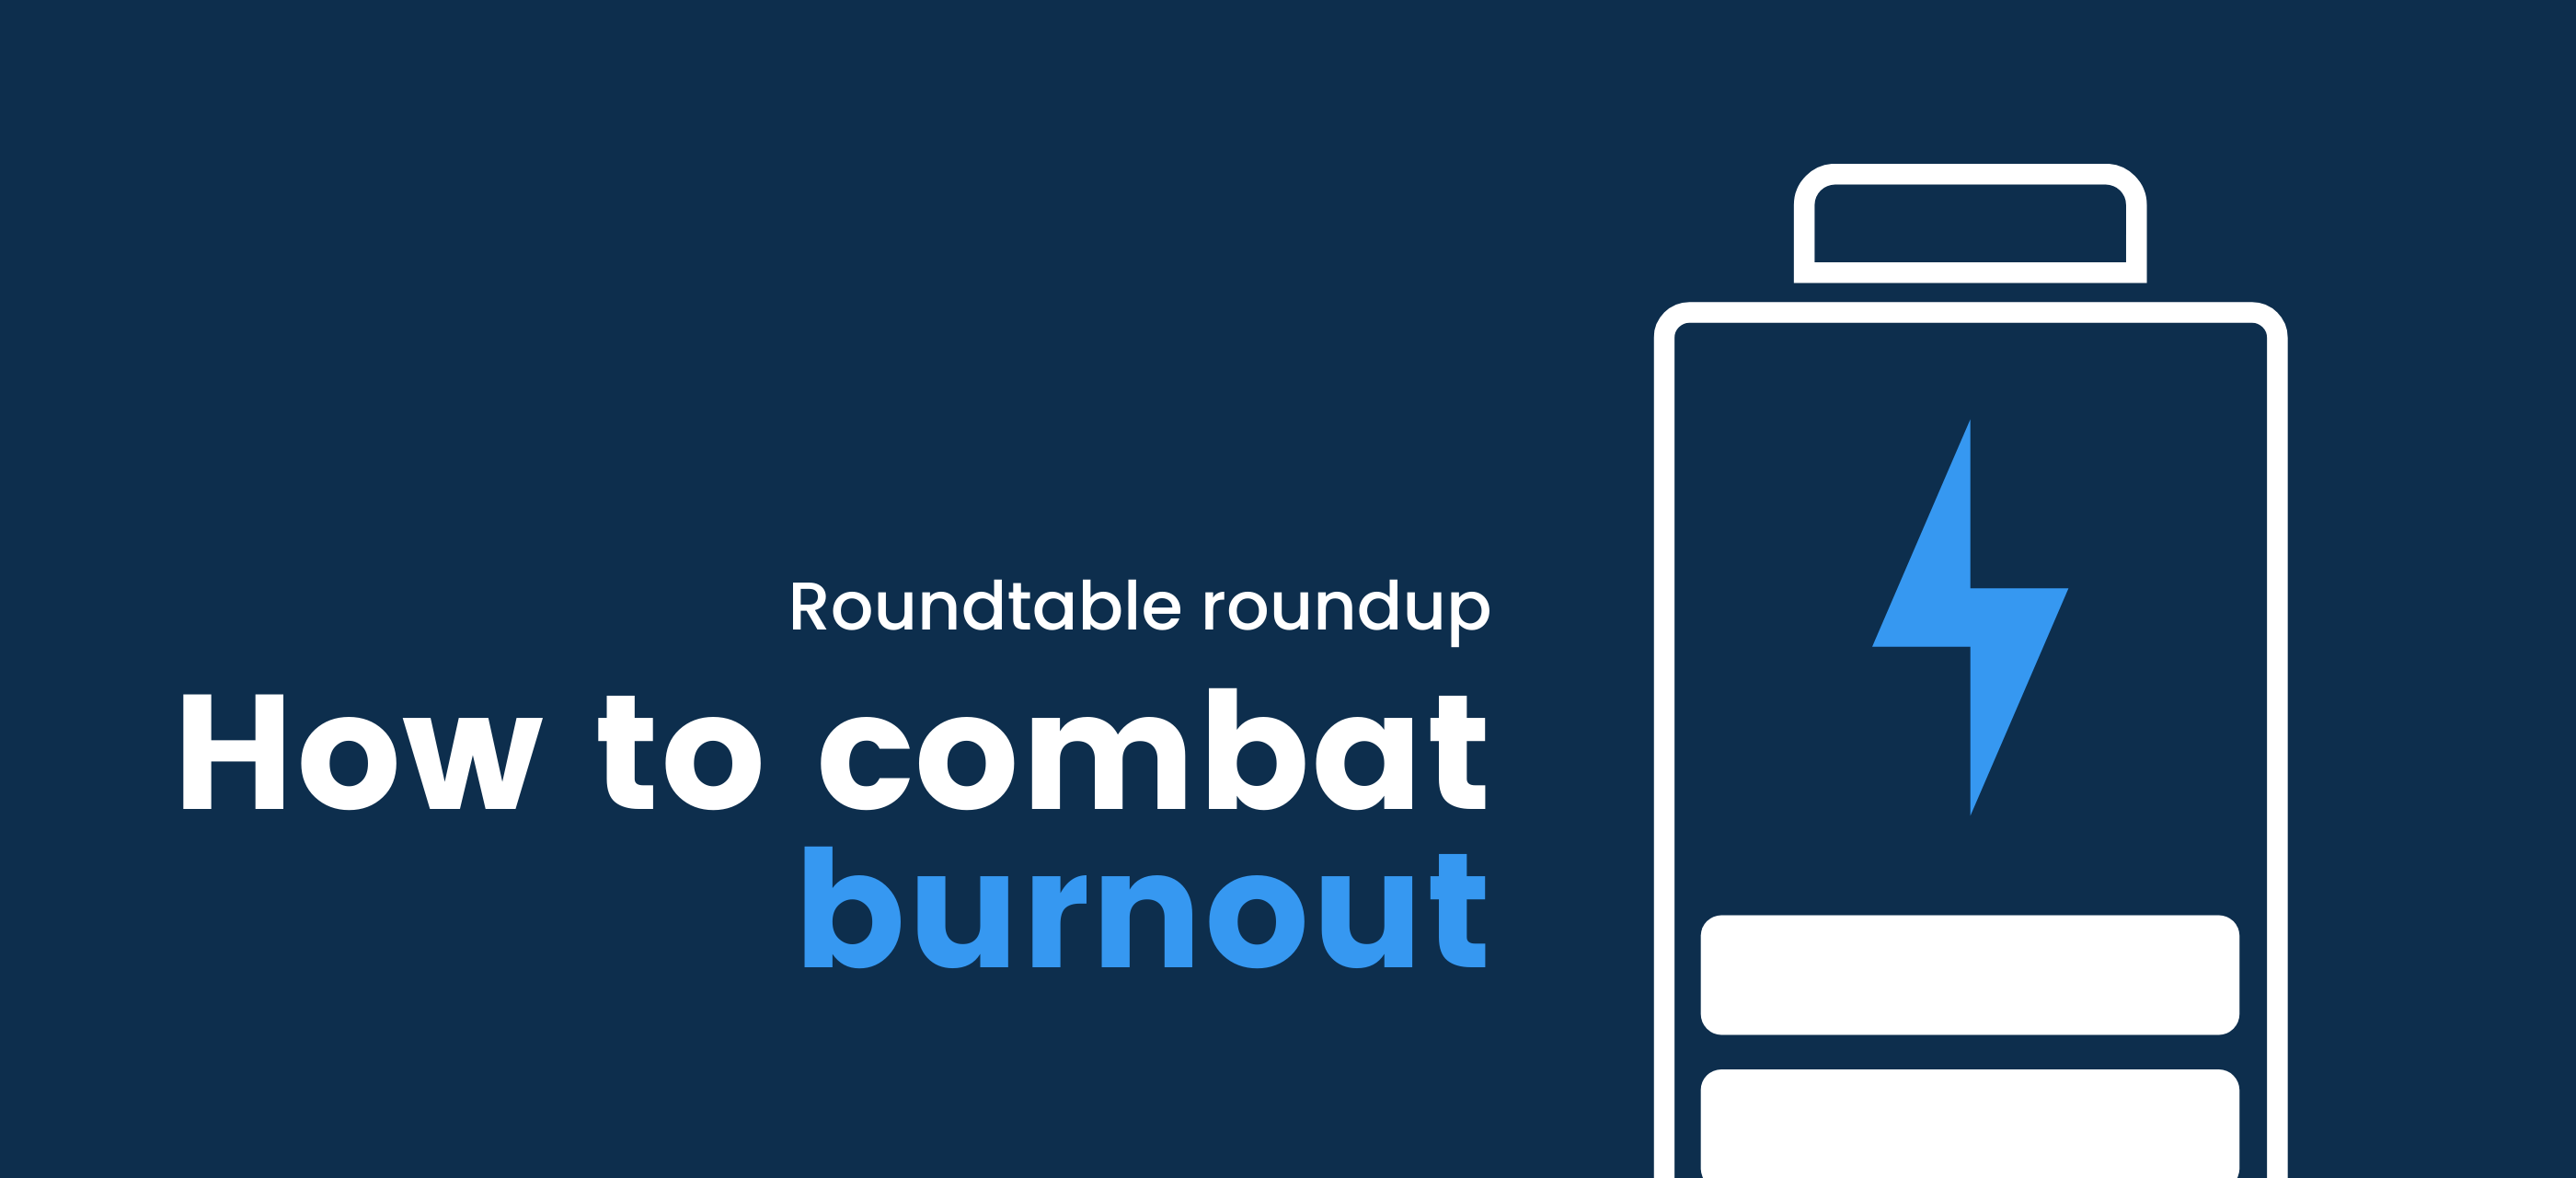 Roundtable roundup 2: how to combat burnout